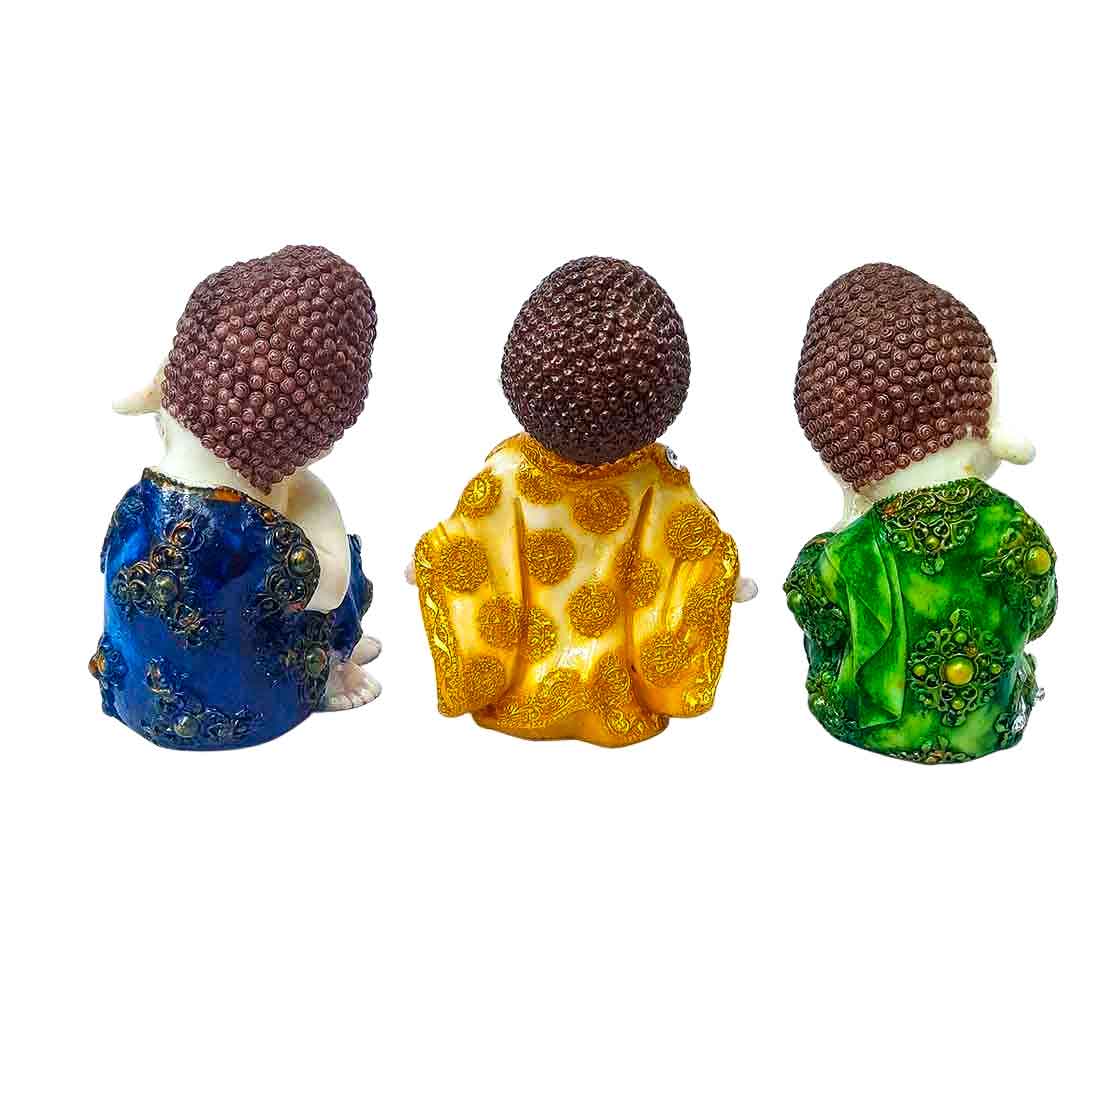 Baby Buddha Home Decor - for Peace & Wealth - 7 Inch - Set of 3 - ApkaMart